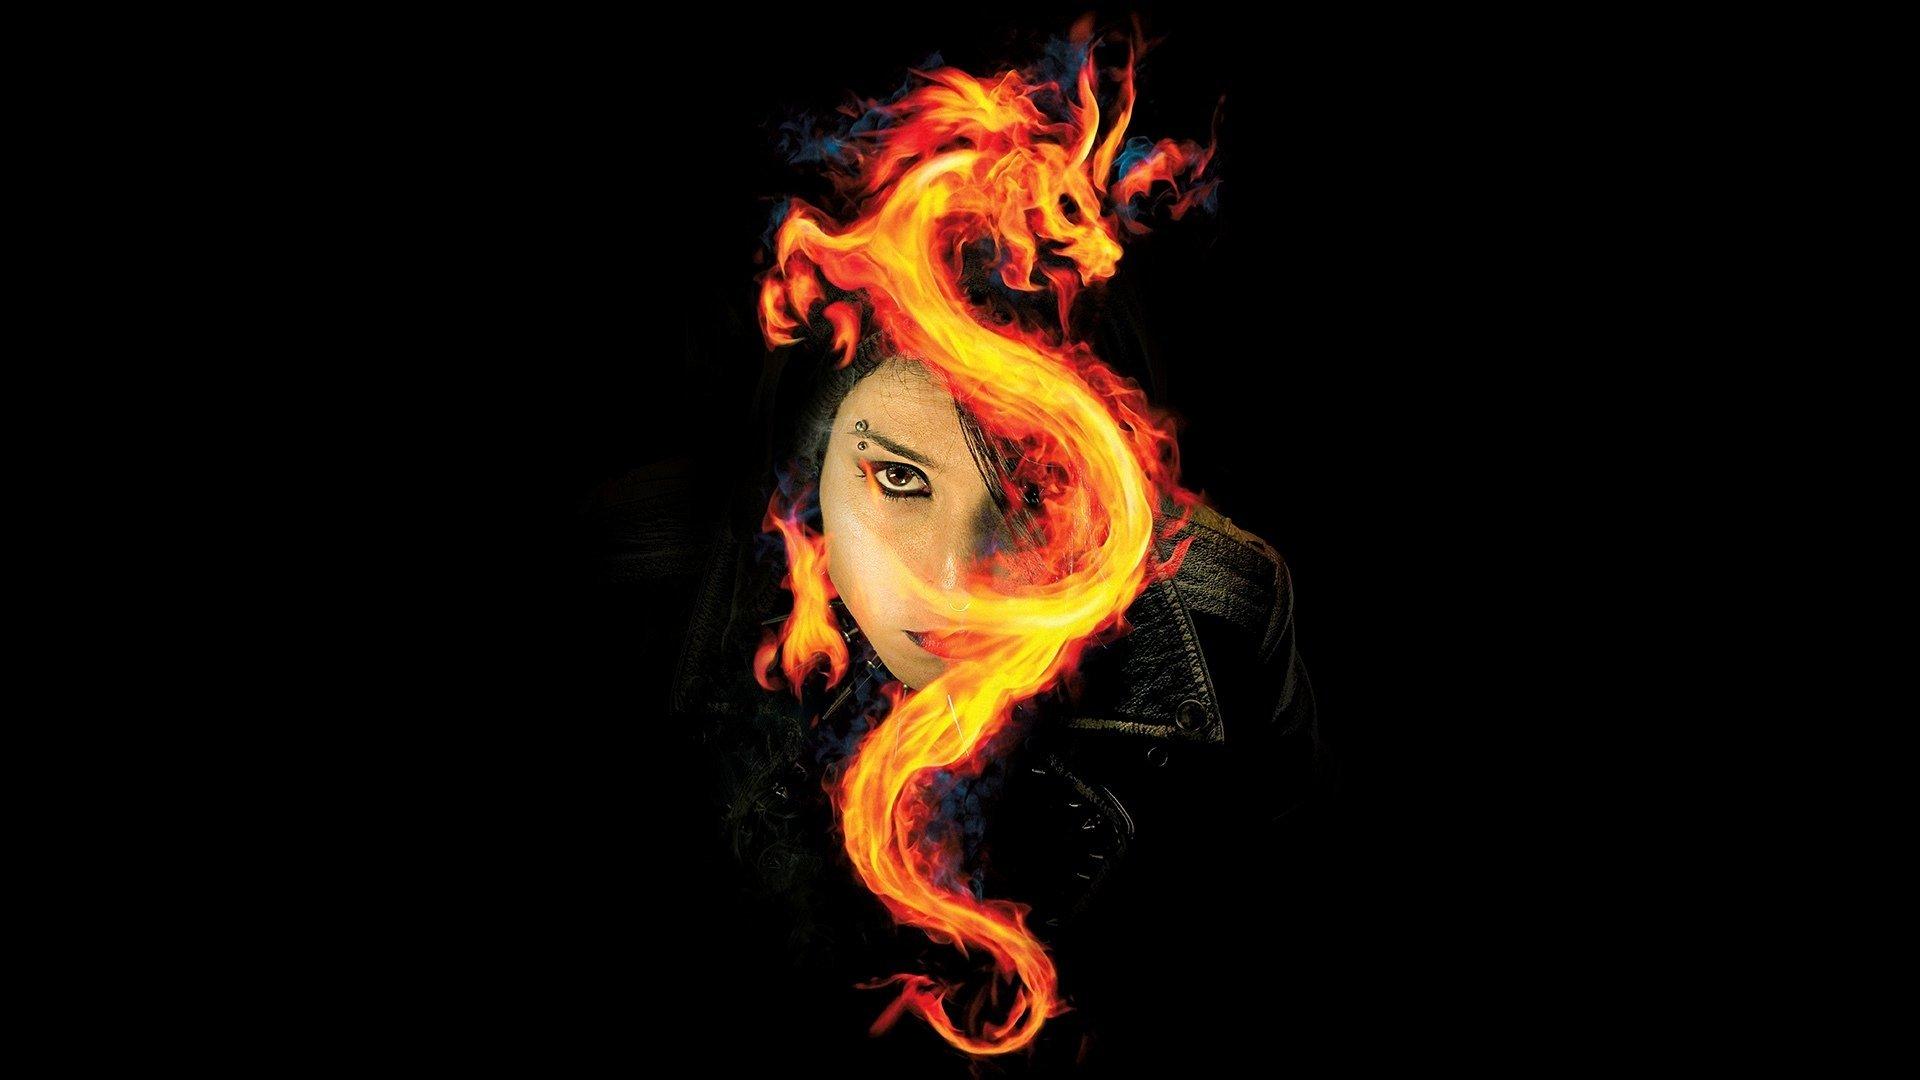 The Girl Who Played With Fire HD Wallpaper. Background